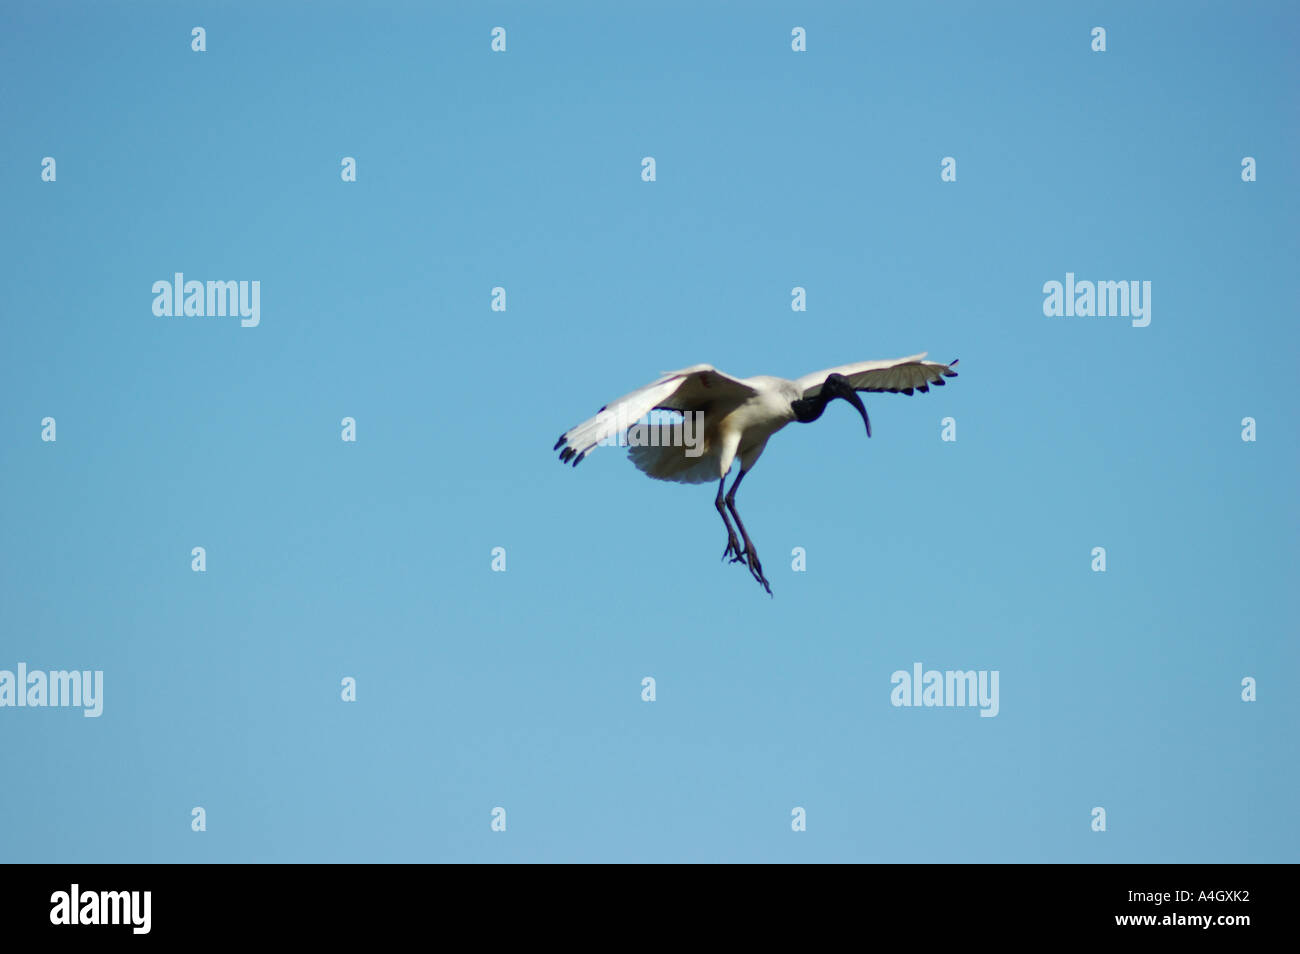 Sacred Ibis Flying, Robben Island, Cape Town South Africa Stock Photo